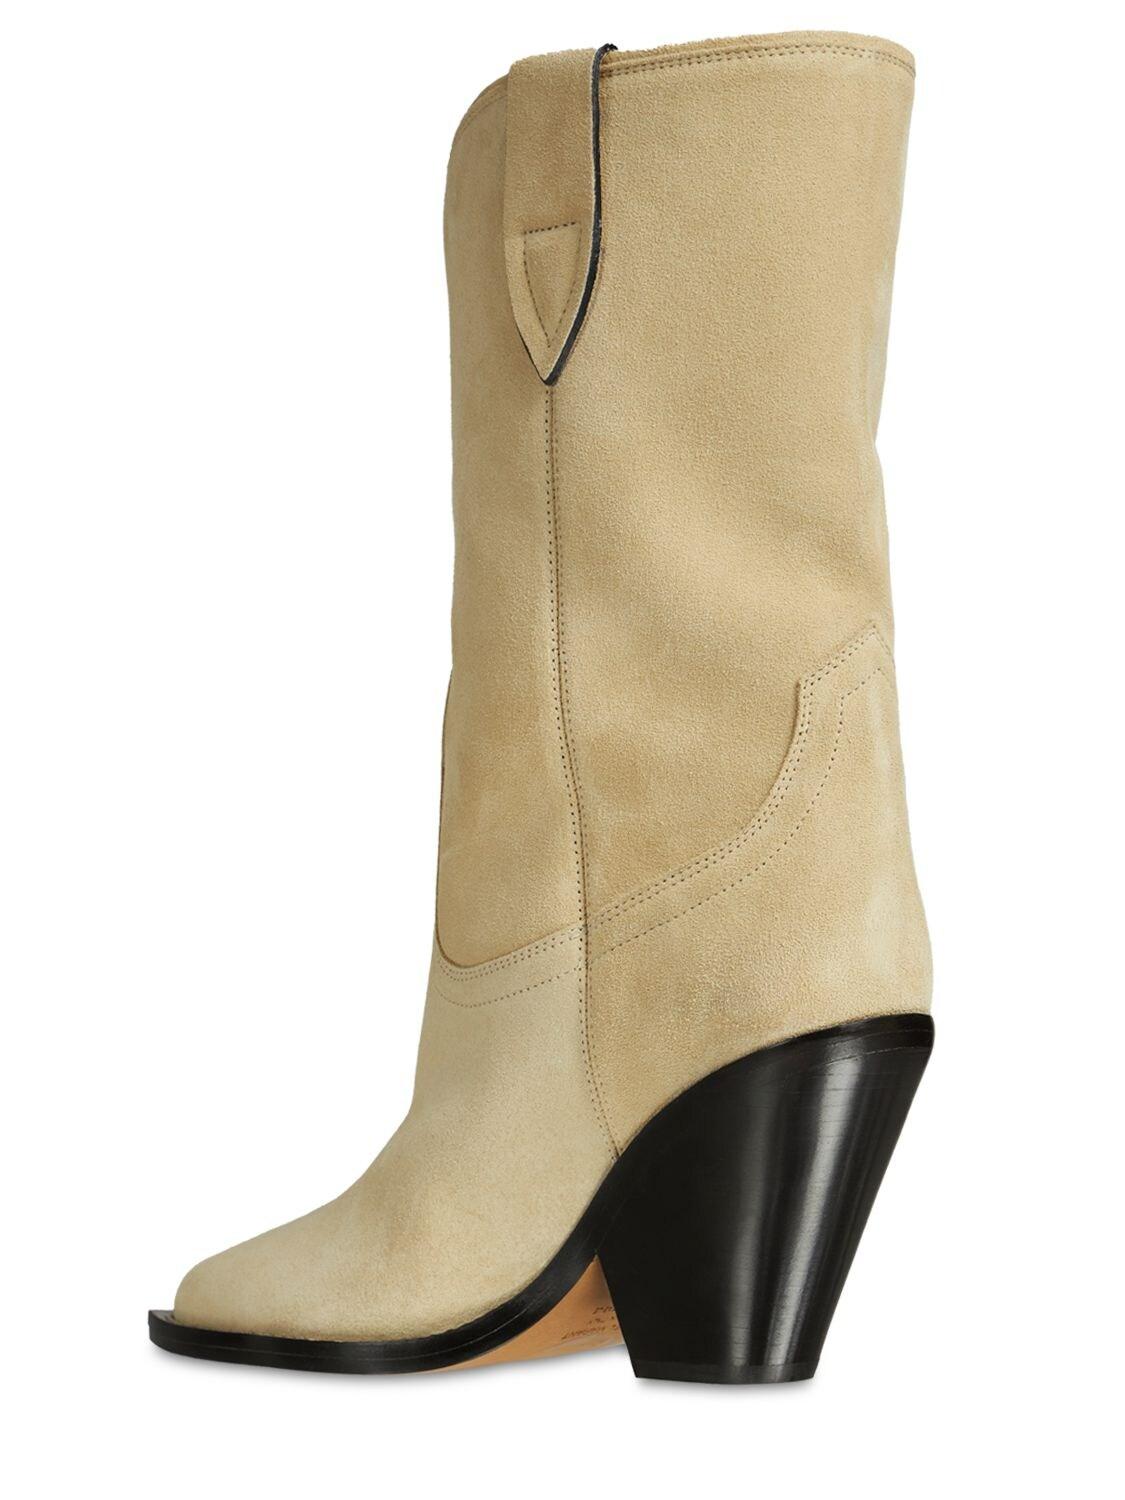 Isabel Marant 90mm Laxime Suede Western Boots in Natural | Lyst